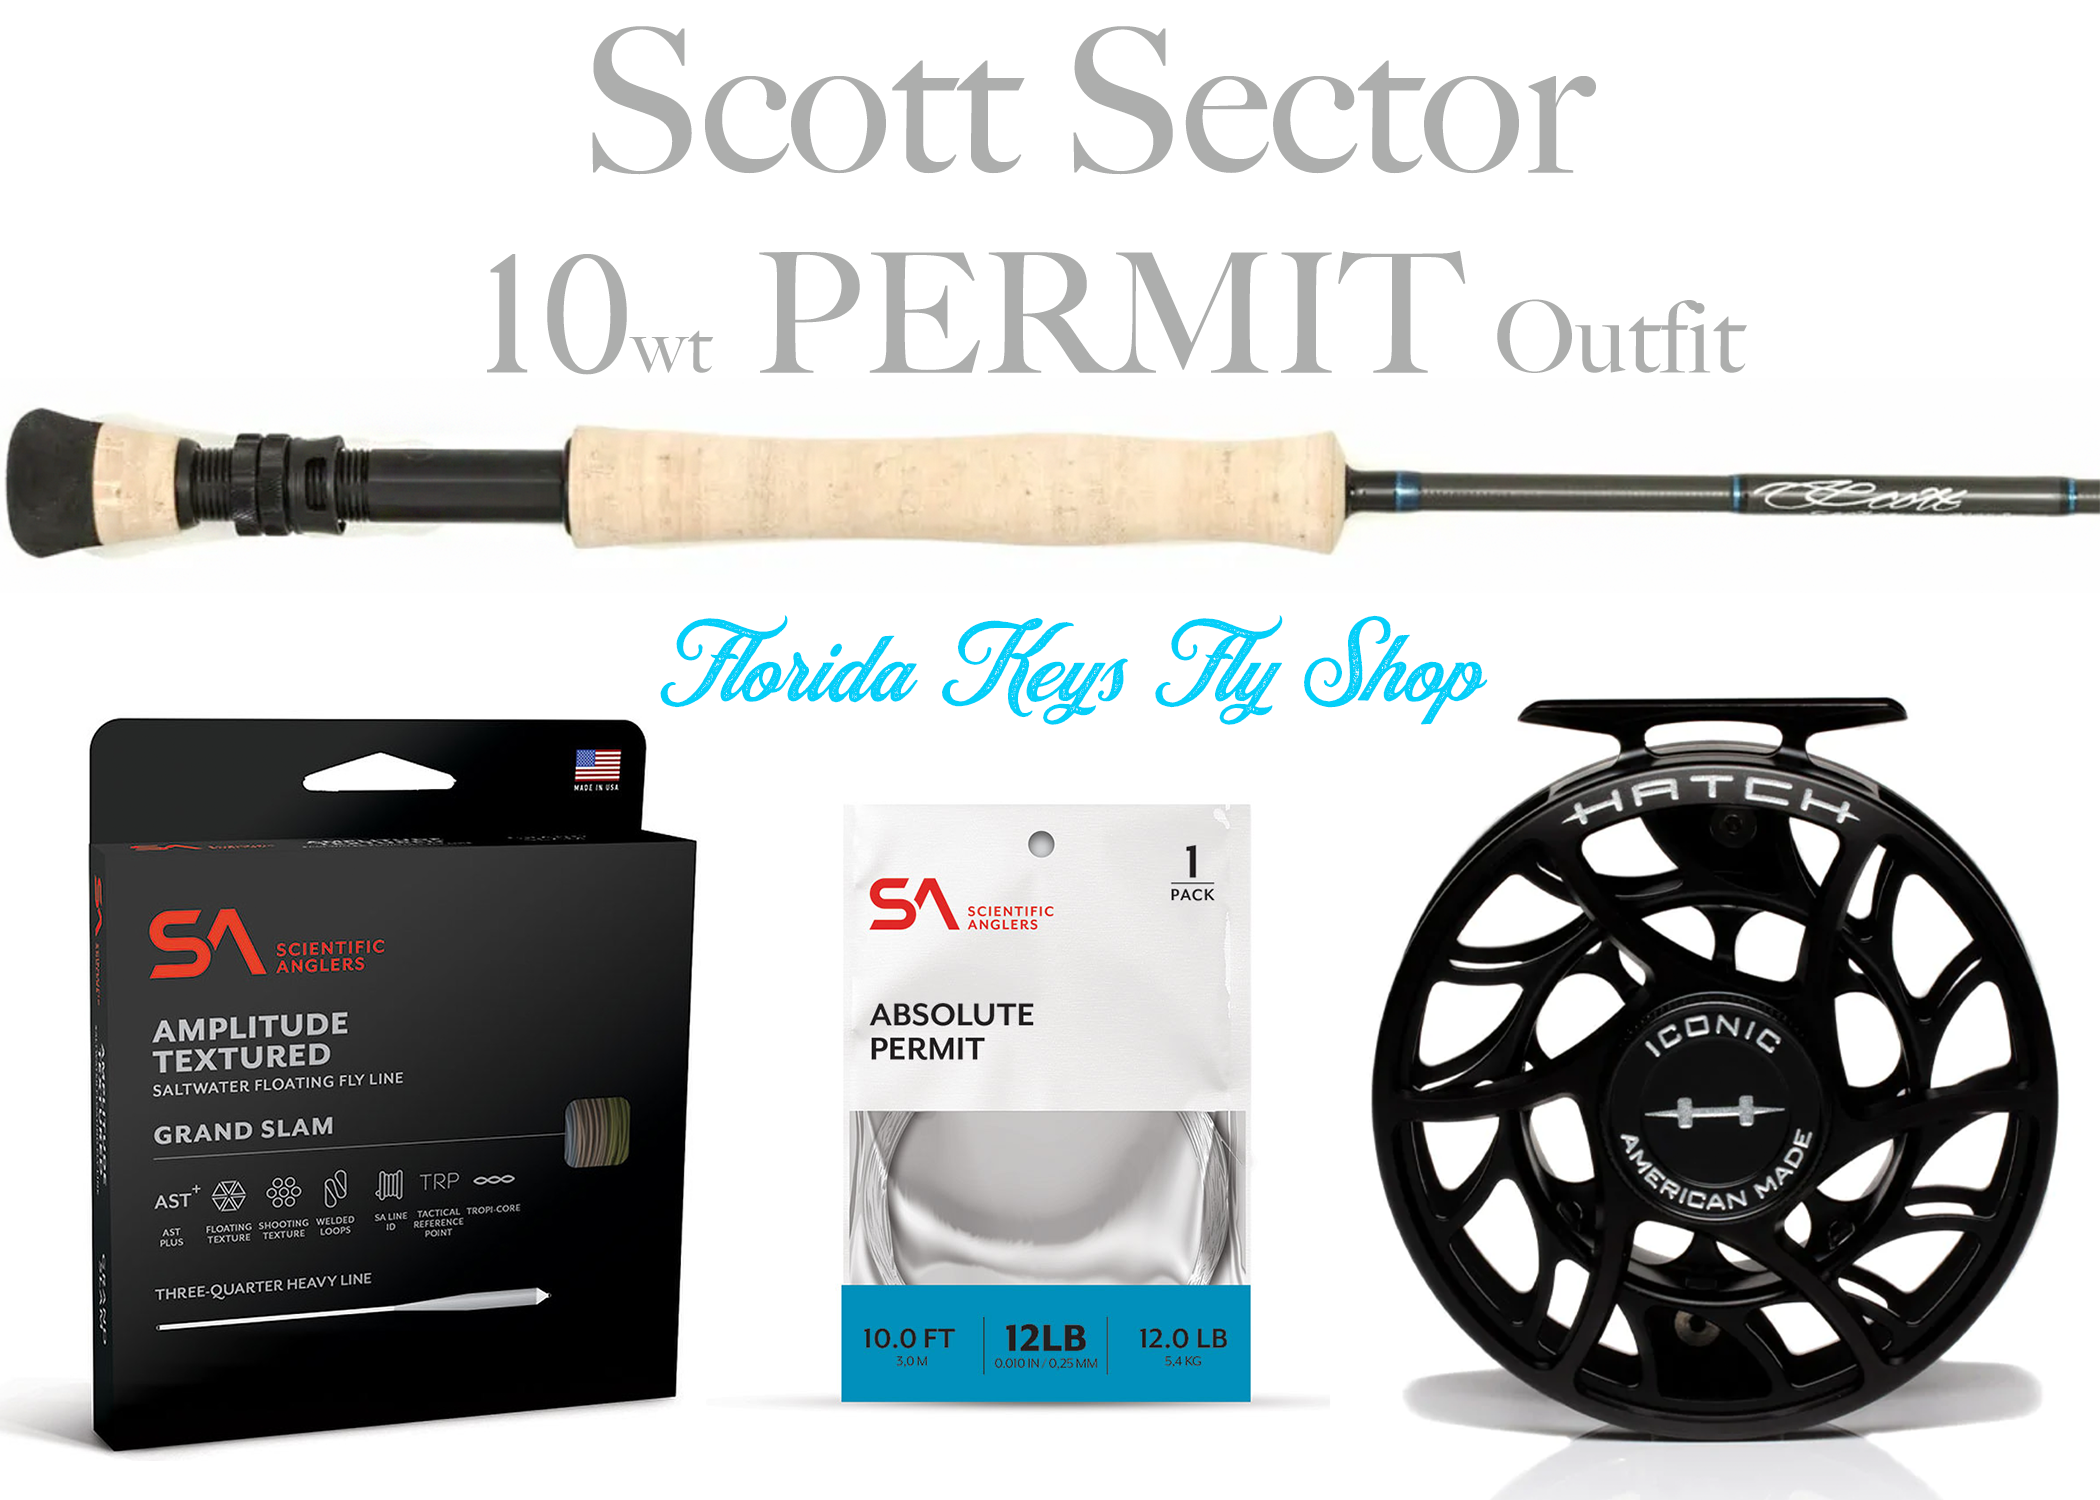 Scott Sector 10wt PERMIT Outfit Combo - NEW!